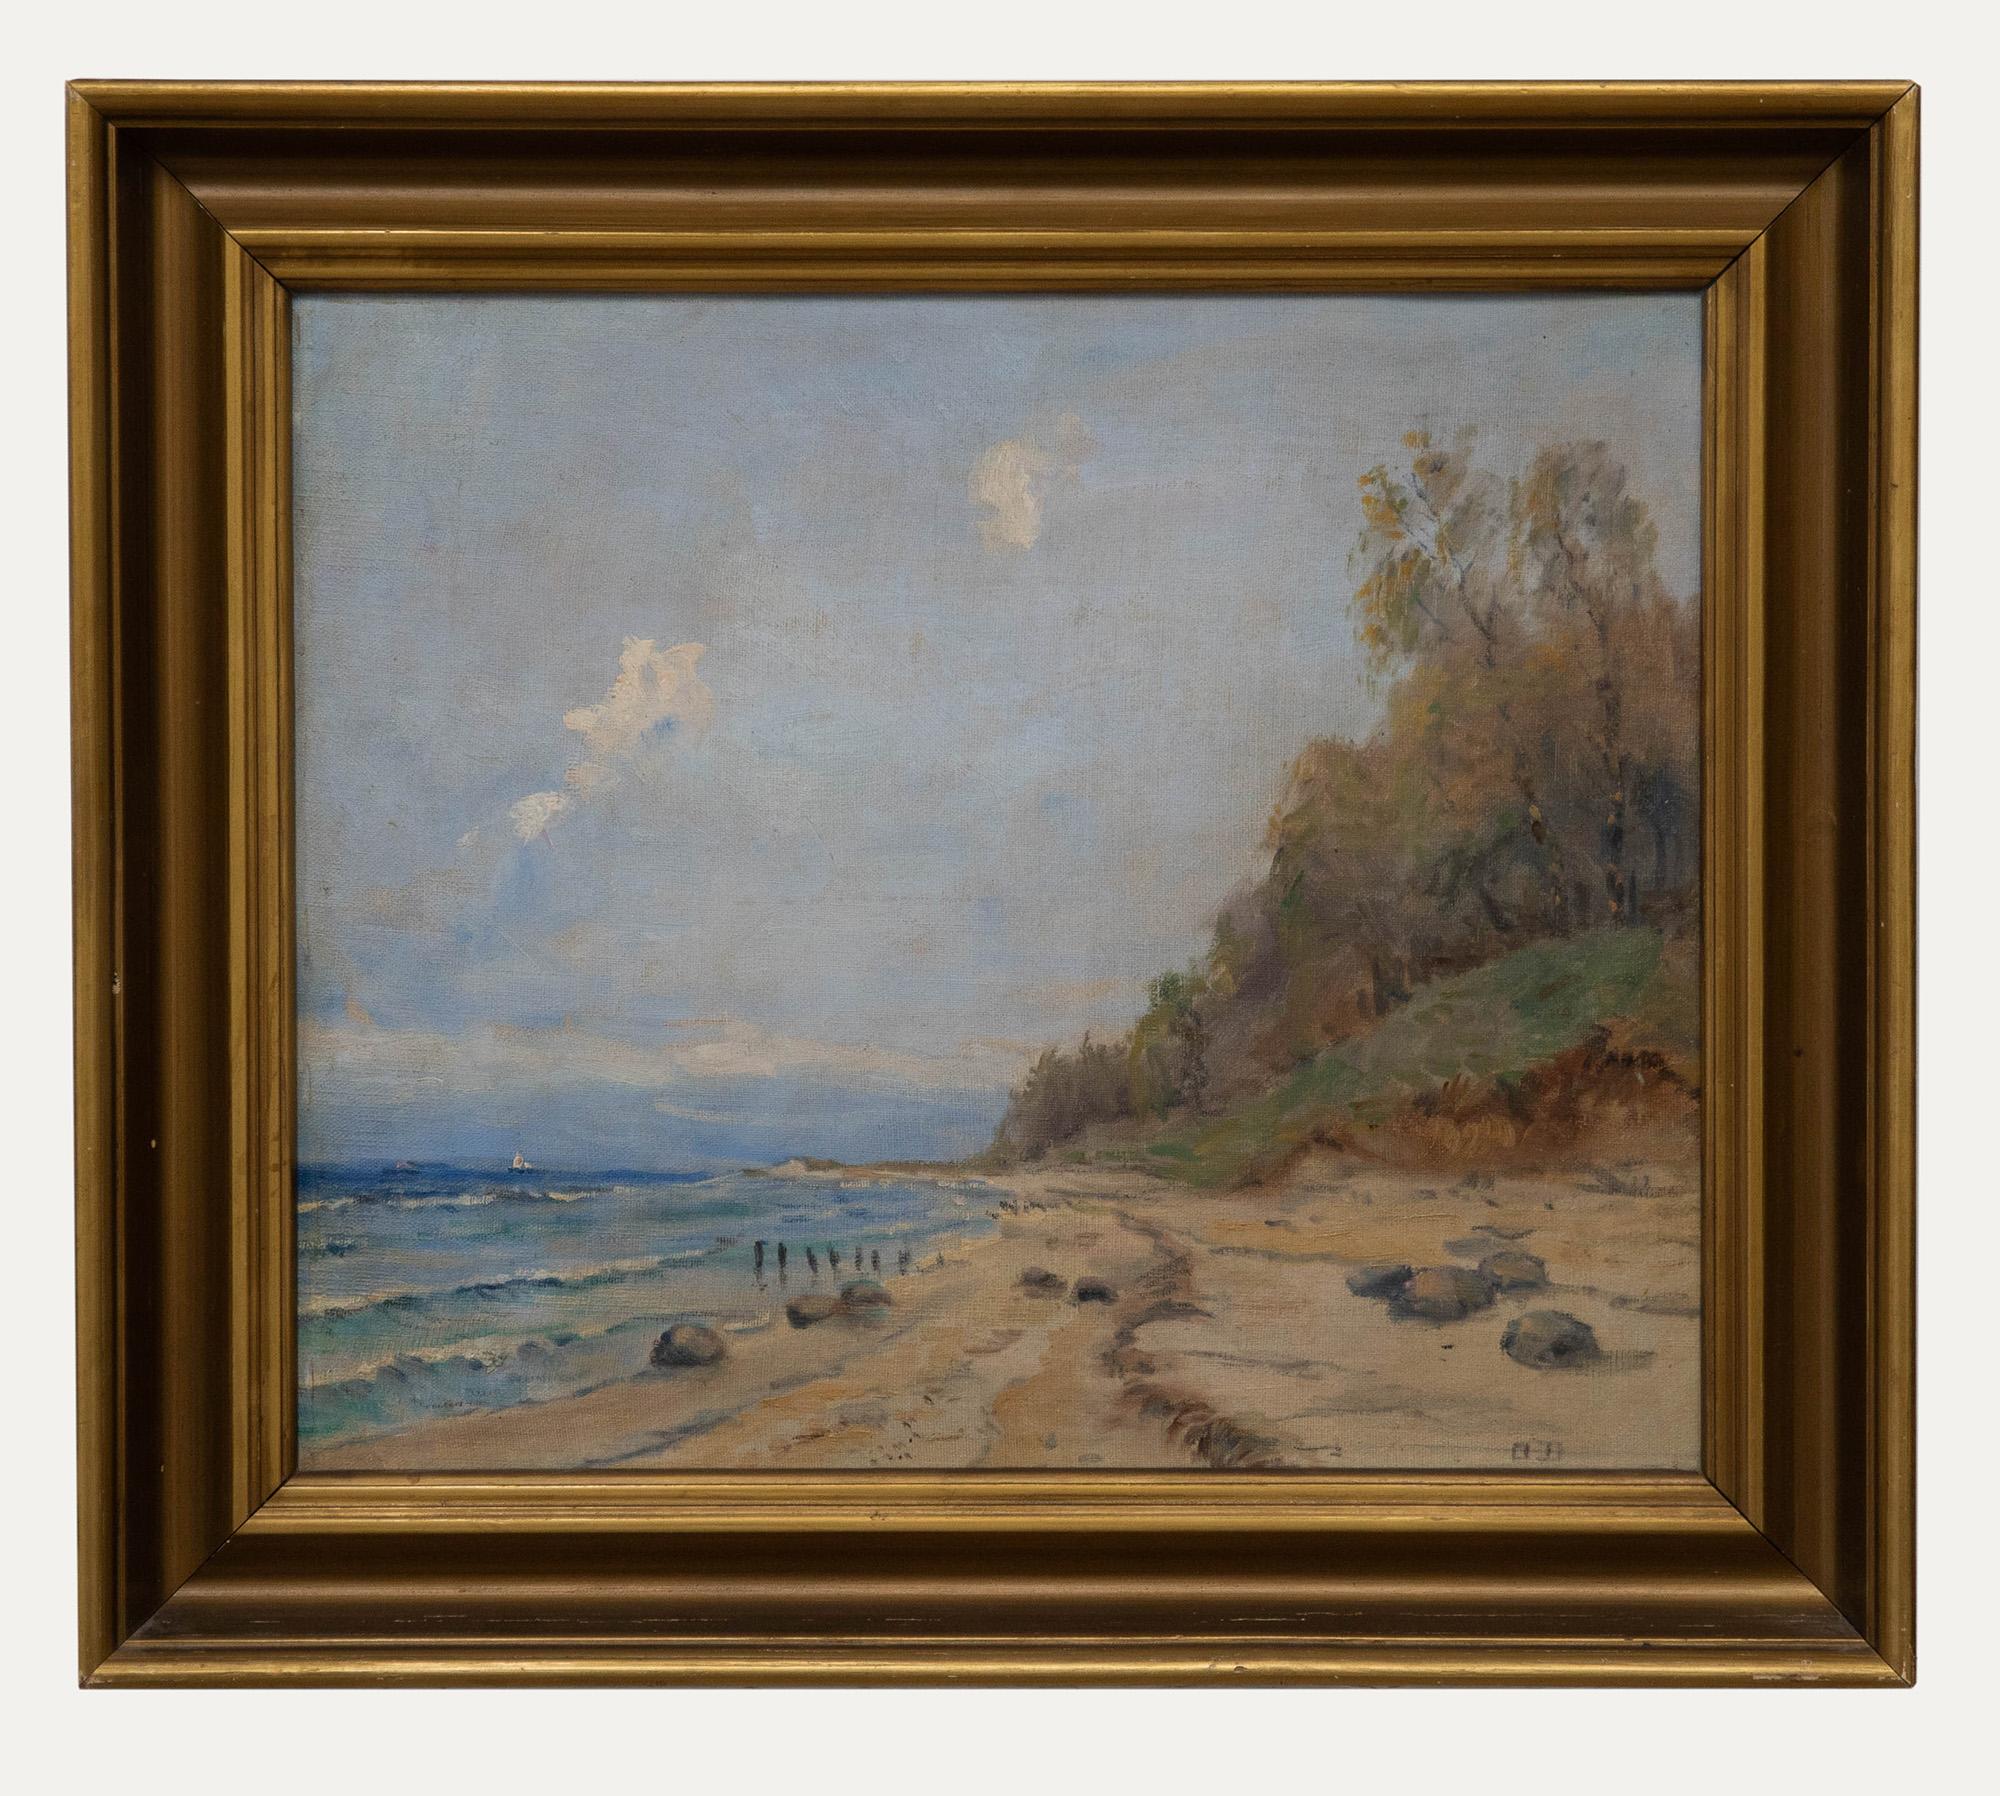 Unknown Figurative Painting - Ole Due (1895-1925) - Early 20th Century Oil, Beach Motif